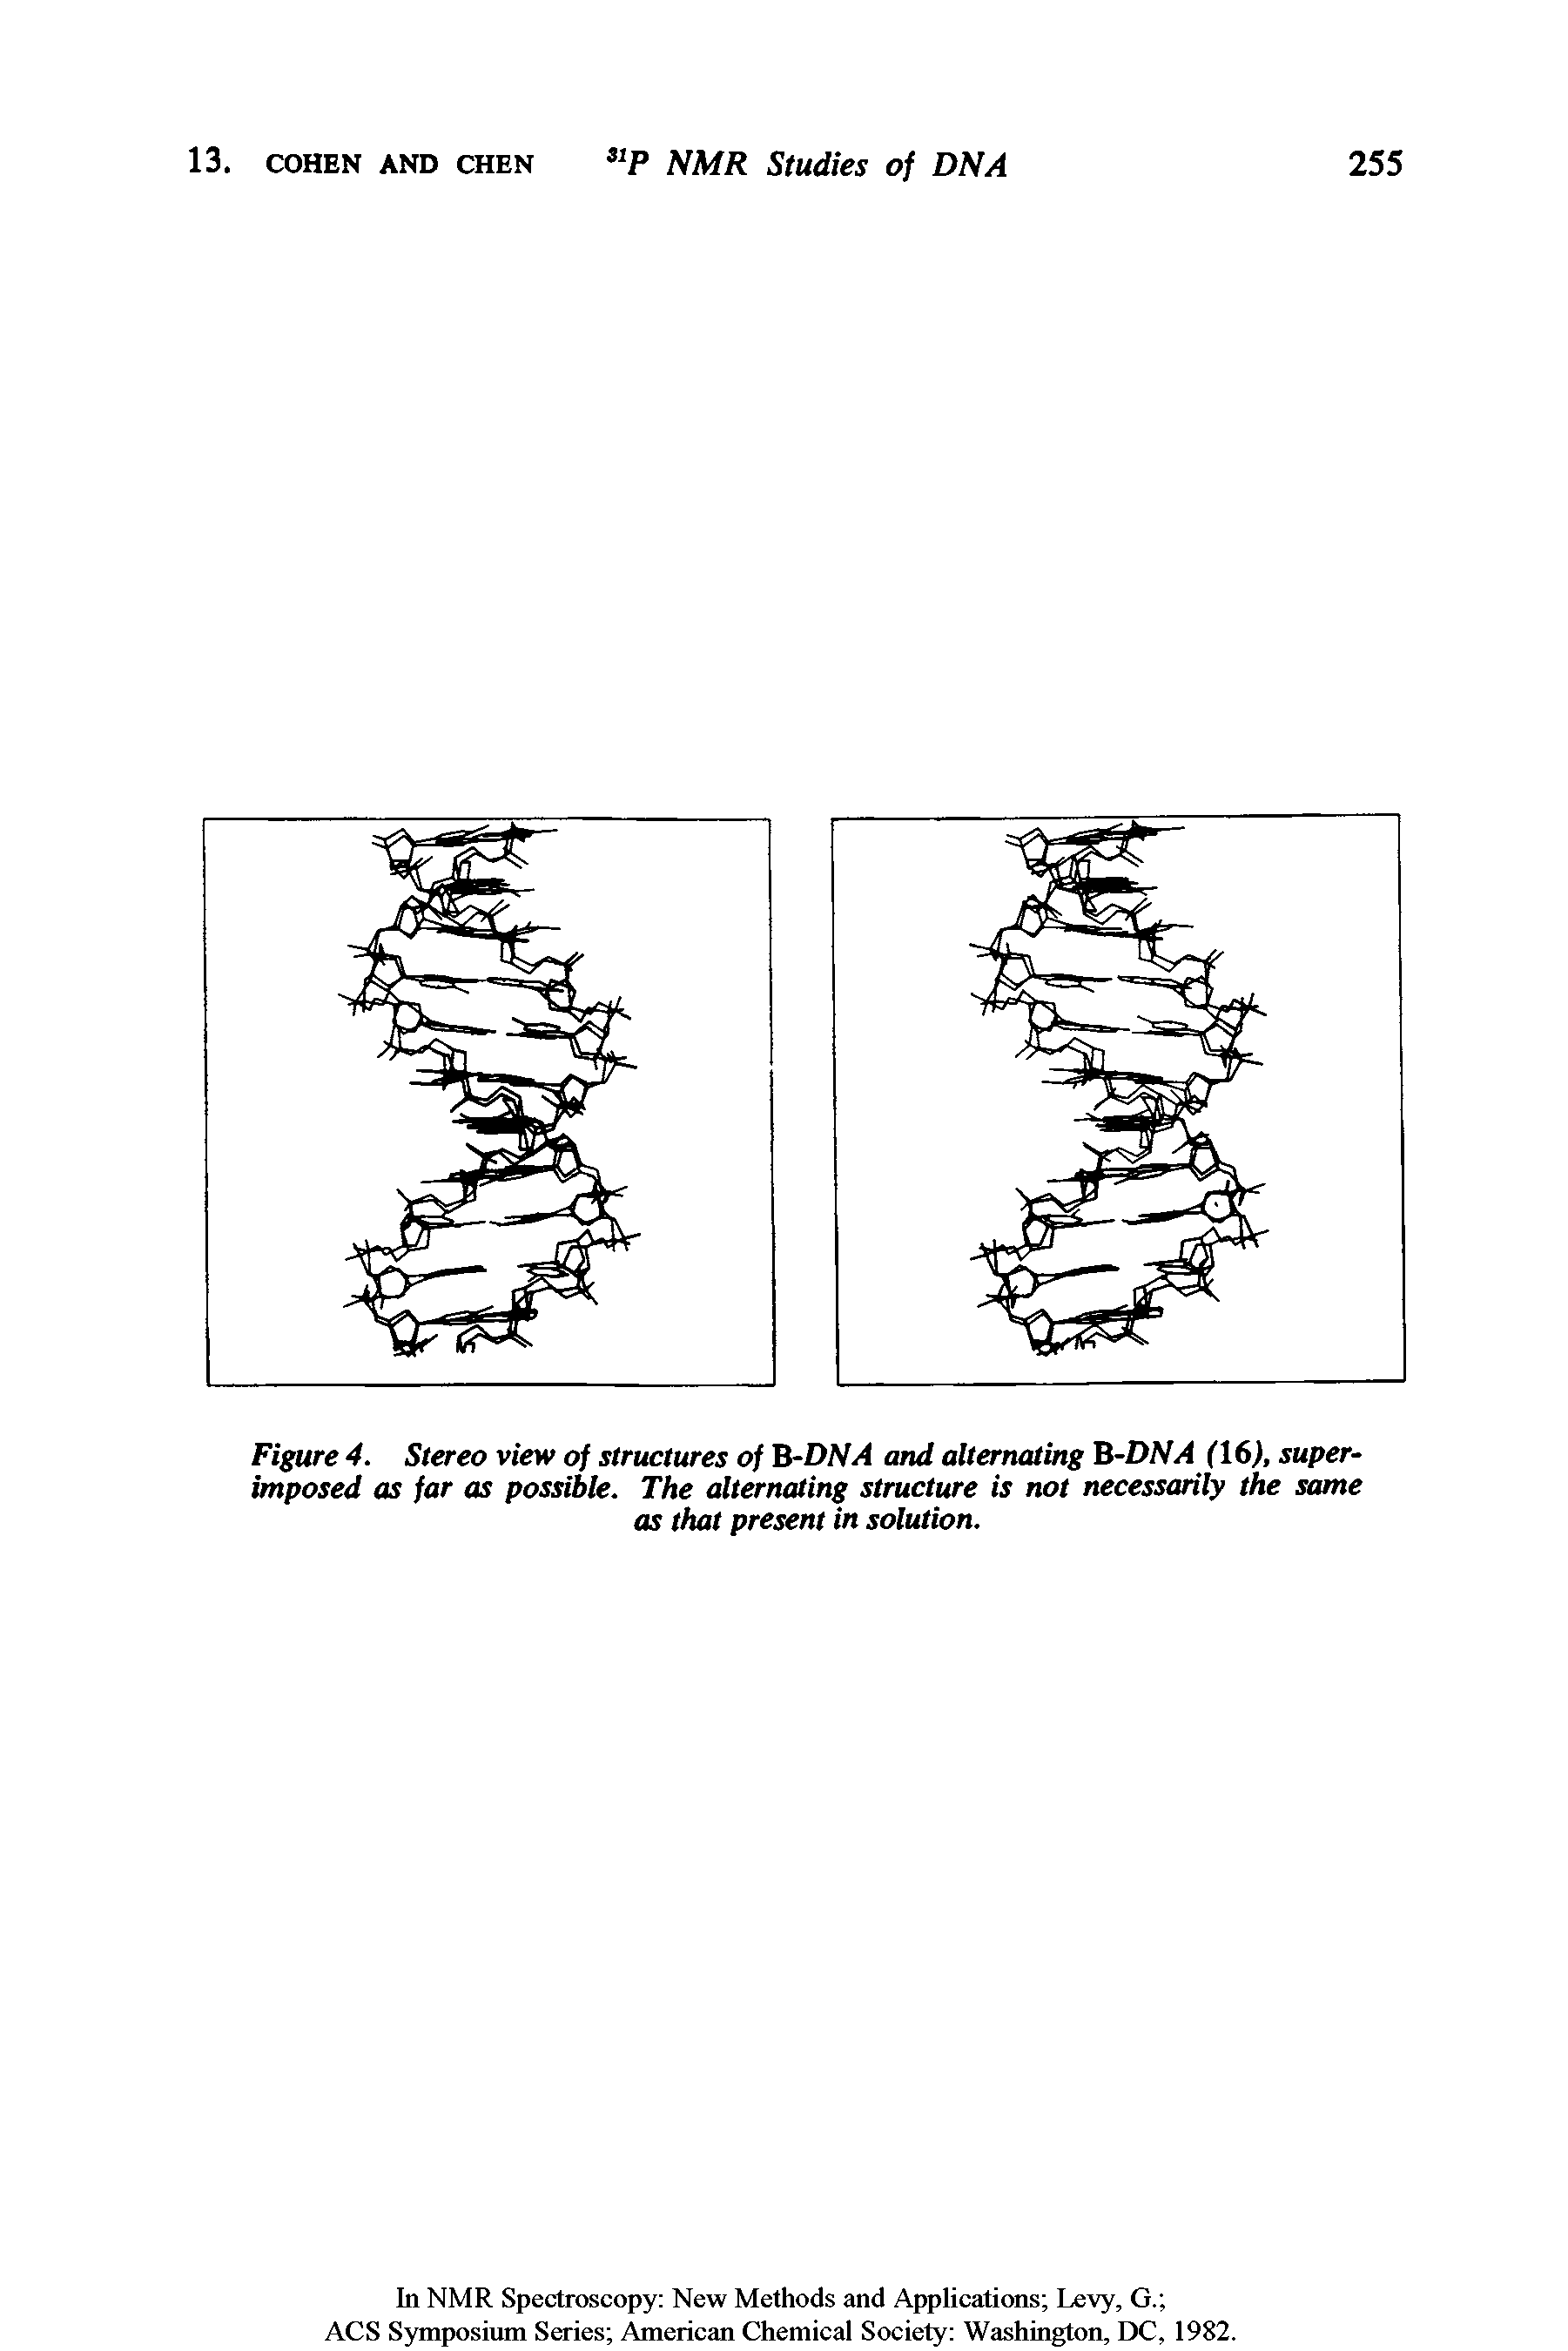 Figure 4. Stereo view of structures of B-DNA and alternating B-DNA (16), superimposed as far as possible. The alternating structure is not necessarily the same as that present in solution.